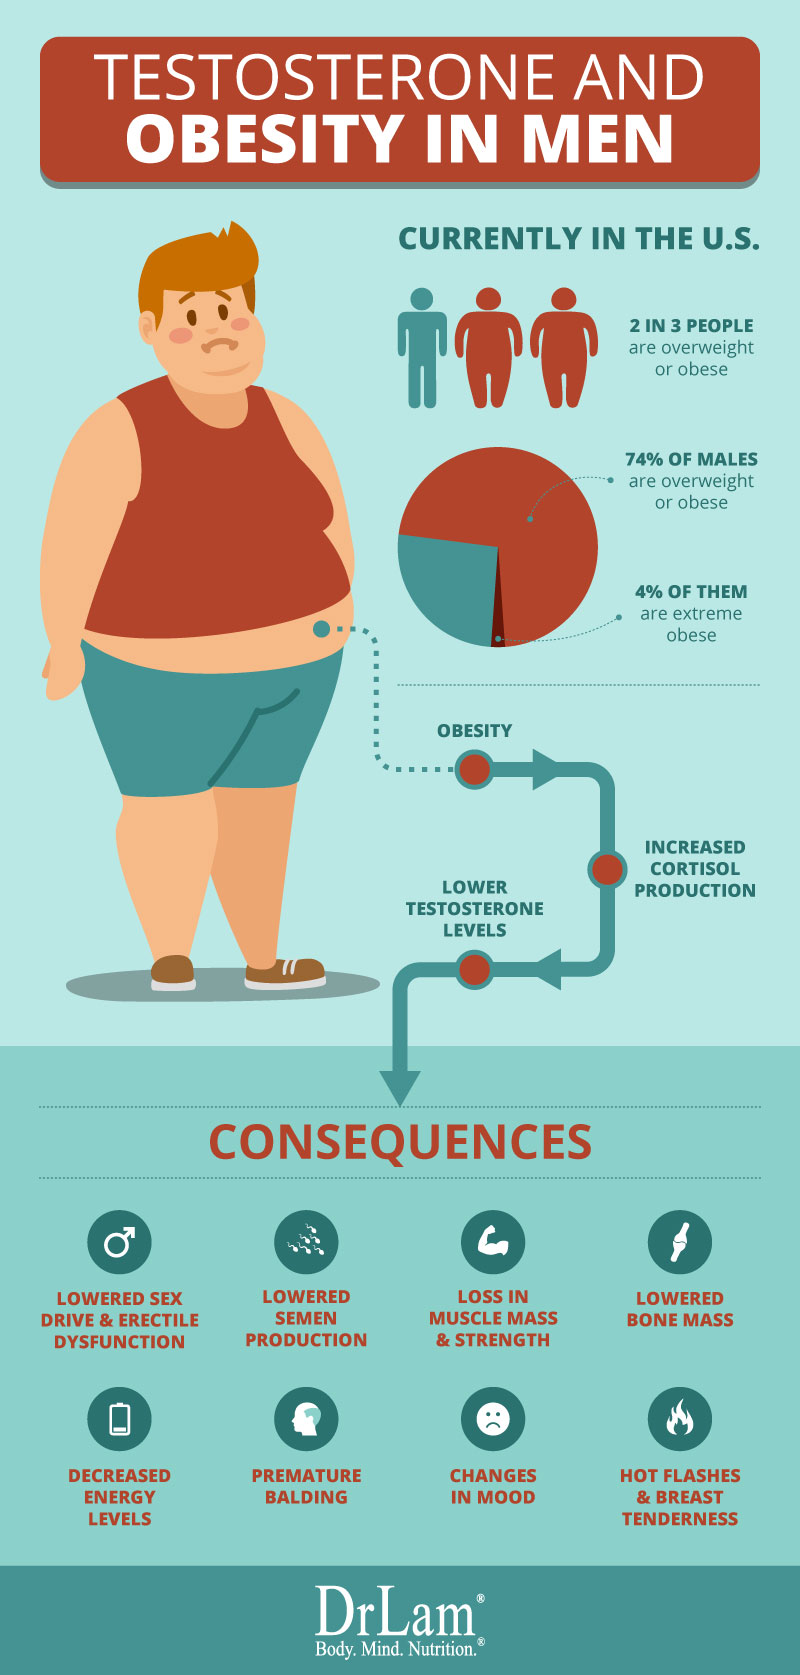 Check out this easy to understand infographic about the testosterone concerns in Obese men